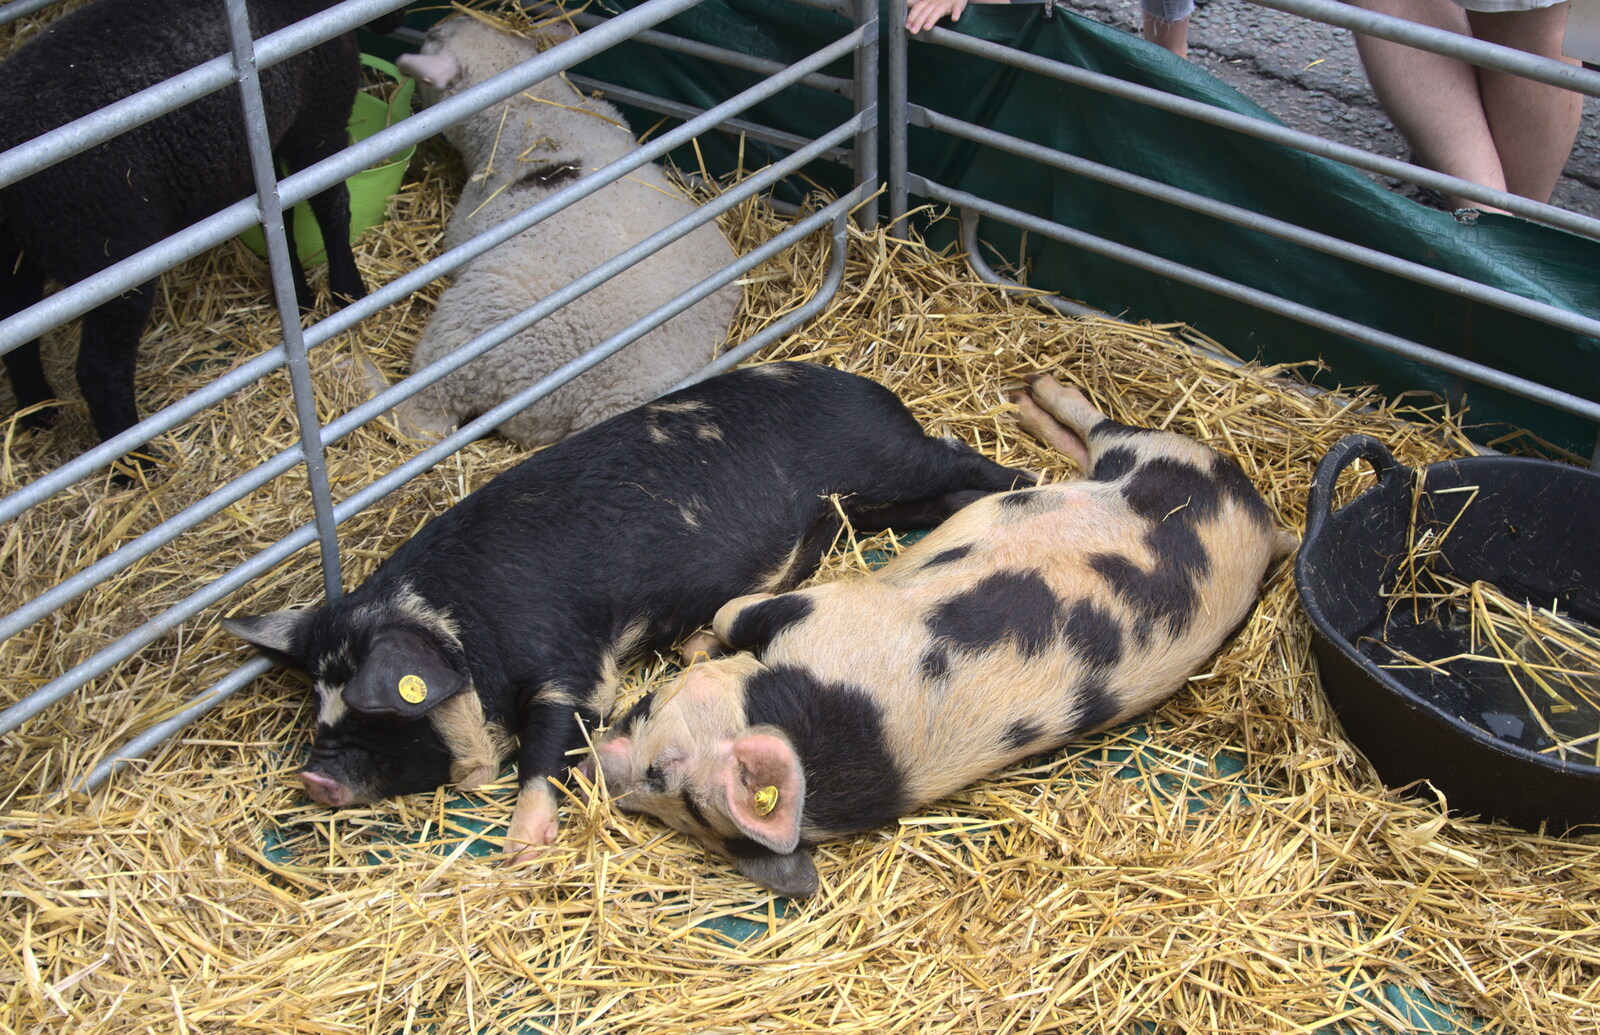 Patchy piglets have a sleep from Wavy and Martina's Combined Birthdays, Thrandeston, Suffolk - 27th May 2017